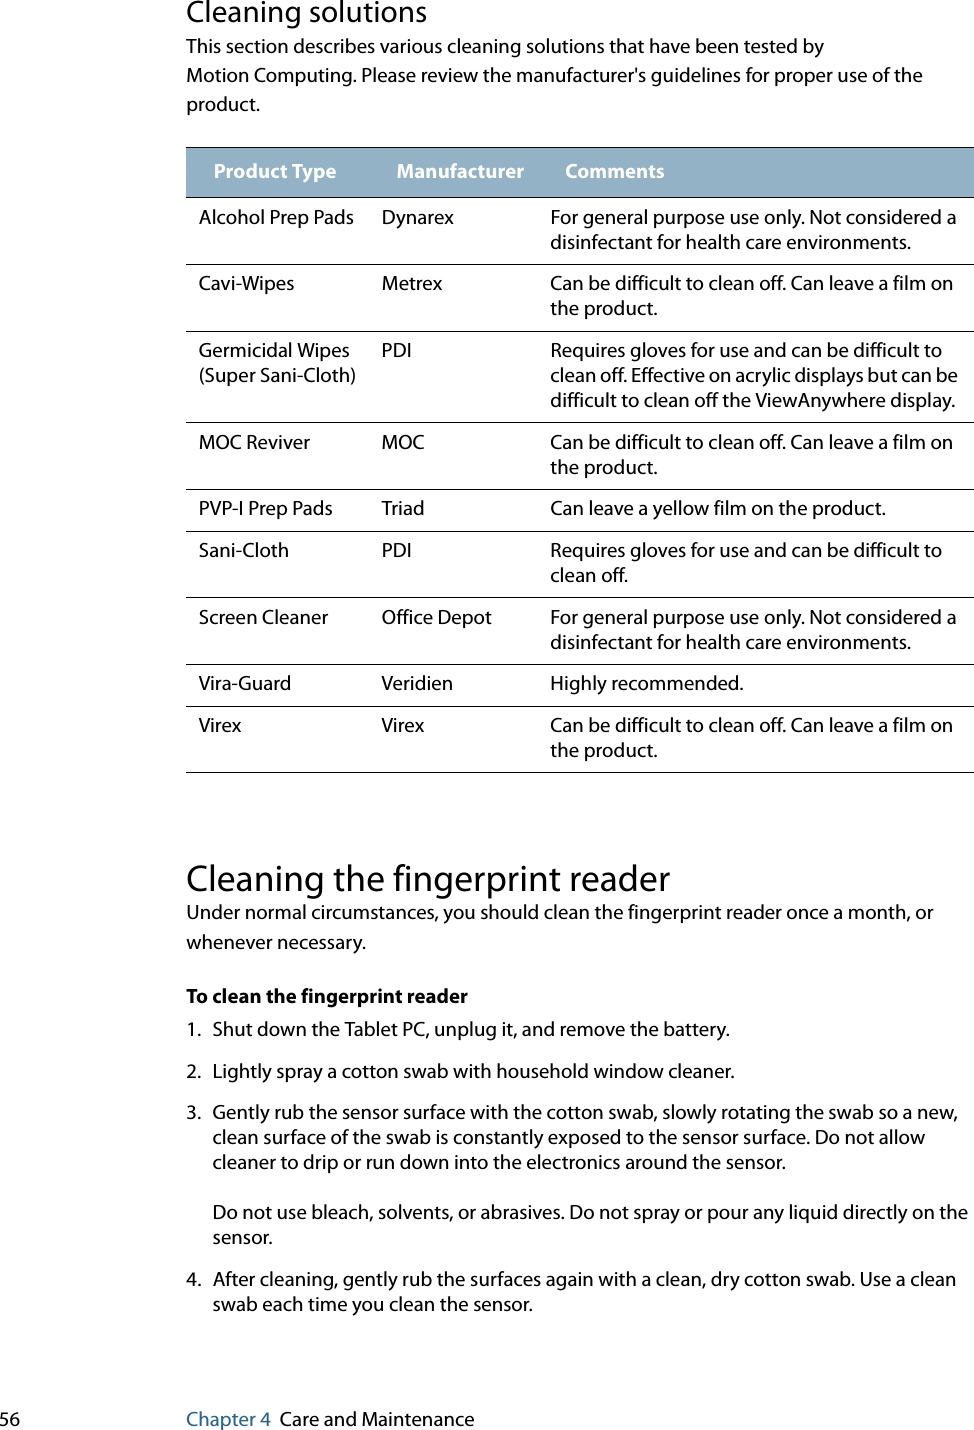 56 Chapter 4 Care and MaintenanceCleaning solutionsThis section describes various cleaning solutions that have been tested by Motion Computing. Please review the manufacturer&apos;s guidelines for proper use of the product.Cleaning the fingerprint readerUnder normal circumstances, you should clean the fingerprint reader once a month, or whenever necessary.To clean the fingerprint reader1. Shut down the Tablet PC, unplug it, and remove the battery.2. Lightly spray a cotton swab with household window cleaner.3. Gently rub the sensor surface with the cotton swab, slowly rotating the swab so a new, clean surface of the swab is constantly exposed to the sensor surface. Do not allow cleaner to drip or run down into the electronics around the sensor.Do not use bleach, solvents, or abrasives. Do not spray or pour any liquid directly on the sensor.4. After cleaning, gently rub the surfaces again with a clean, dry cotton swab. Use a clean swab each time you clean the sensor.Product Type Manufacturer CommentsAlcohol Prep Pads Dynarex For general purpose use only. Not considered a disinfectant for health care environments.Cavi-Wipes Metrex Can be difficult to clean off. Can leave a film on the product.Germicidal Wipes (Super Sani-Cloth)PDI Requires gloves for use and can be difficult to clean off. Effective on acrylic displays but can be difficult to clean off the ViewAnywhere display.MOC Reviver MOC Can be difficult to clean off. Can leave a film on the product.PVP-I Prep Pads Triad Can leave a yellow film on the product.Sani-Cloth PDI Requires gloves for use and can be difficult to clean off.Screen Cleaner Office Depot For general purpose use only. Not considered a disinfectant for health care environments.Vira-Guard Veridien Highly recommended.Virex Virex Can be difficult to clean off. Can leave a film on the product.